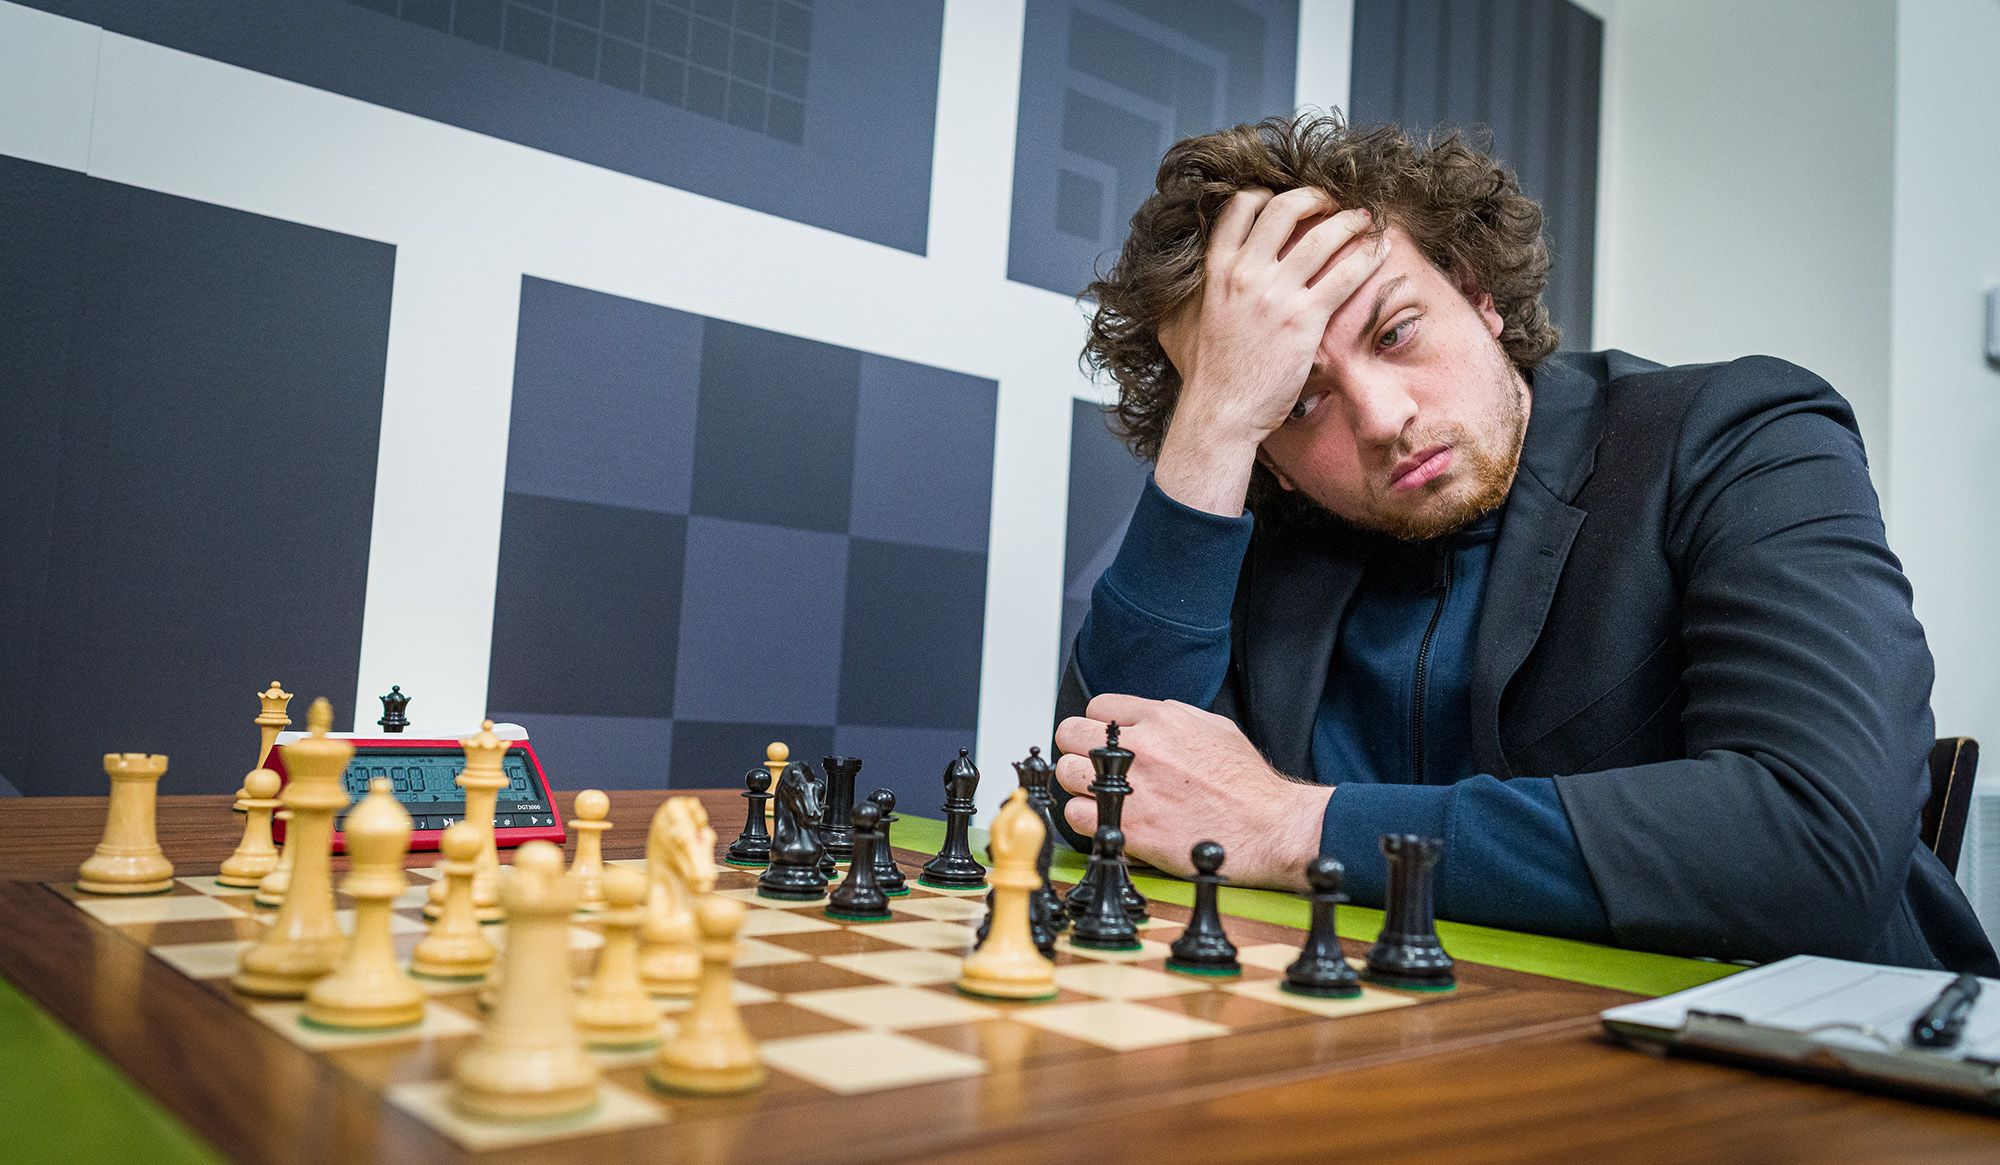 Chess is taking over the online video game world – and both are changing  from this unlikely pairing